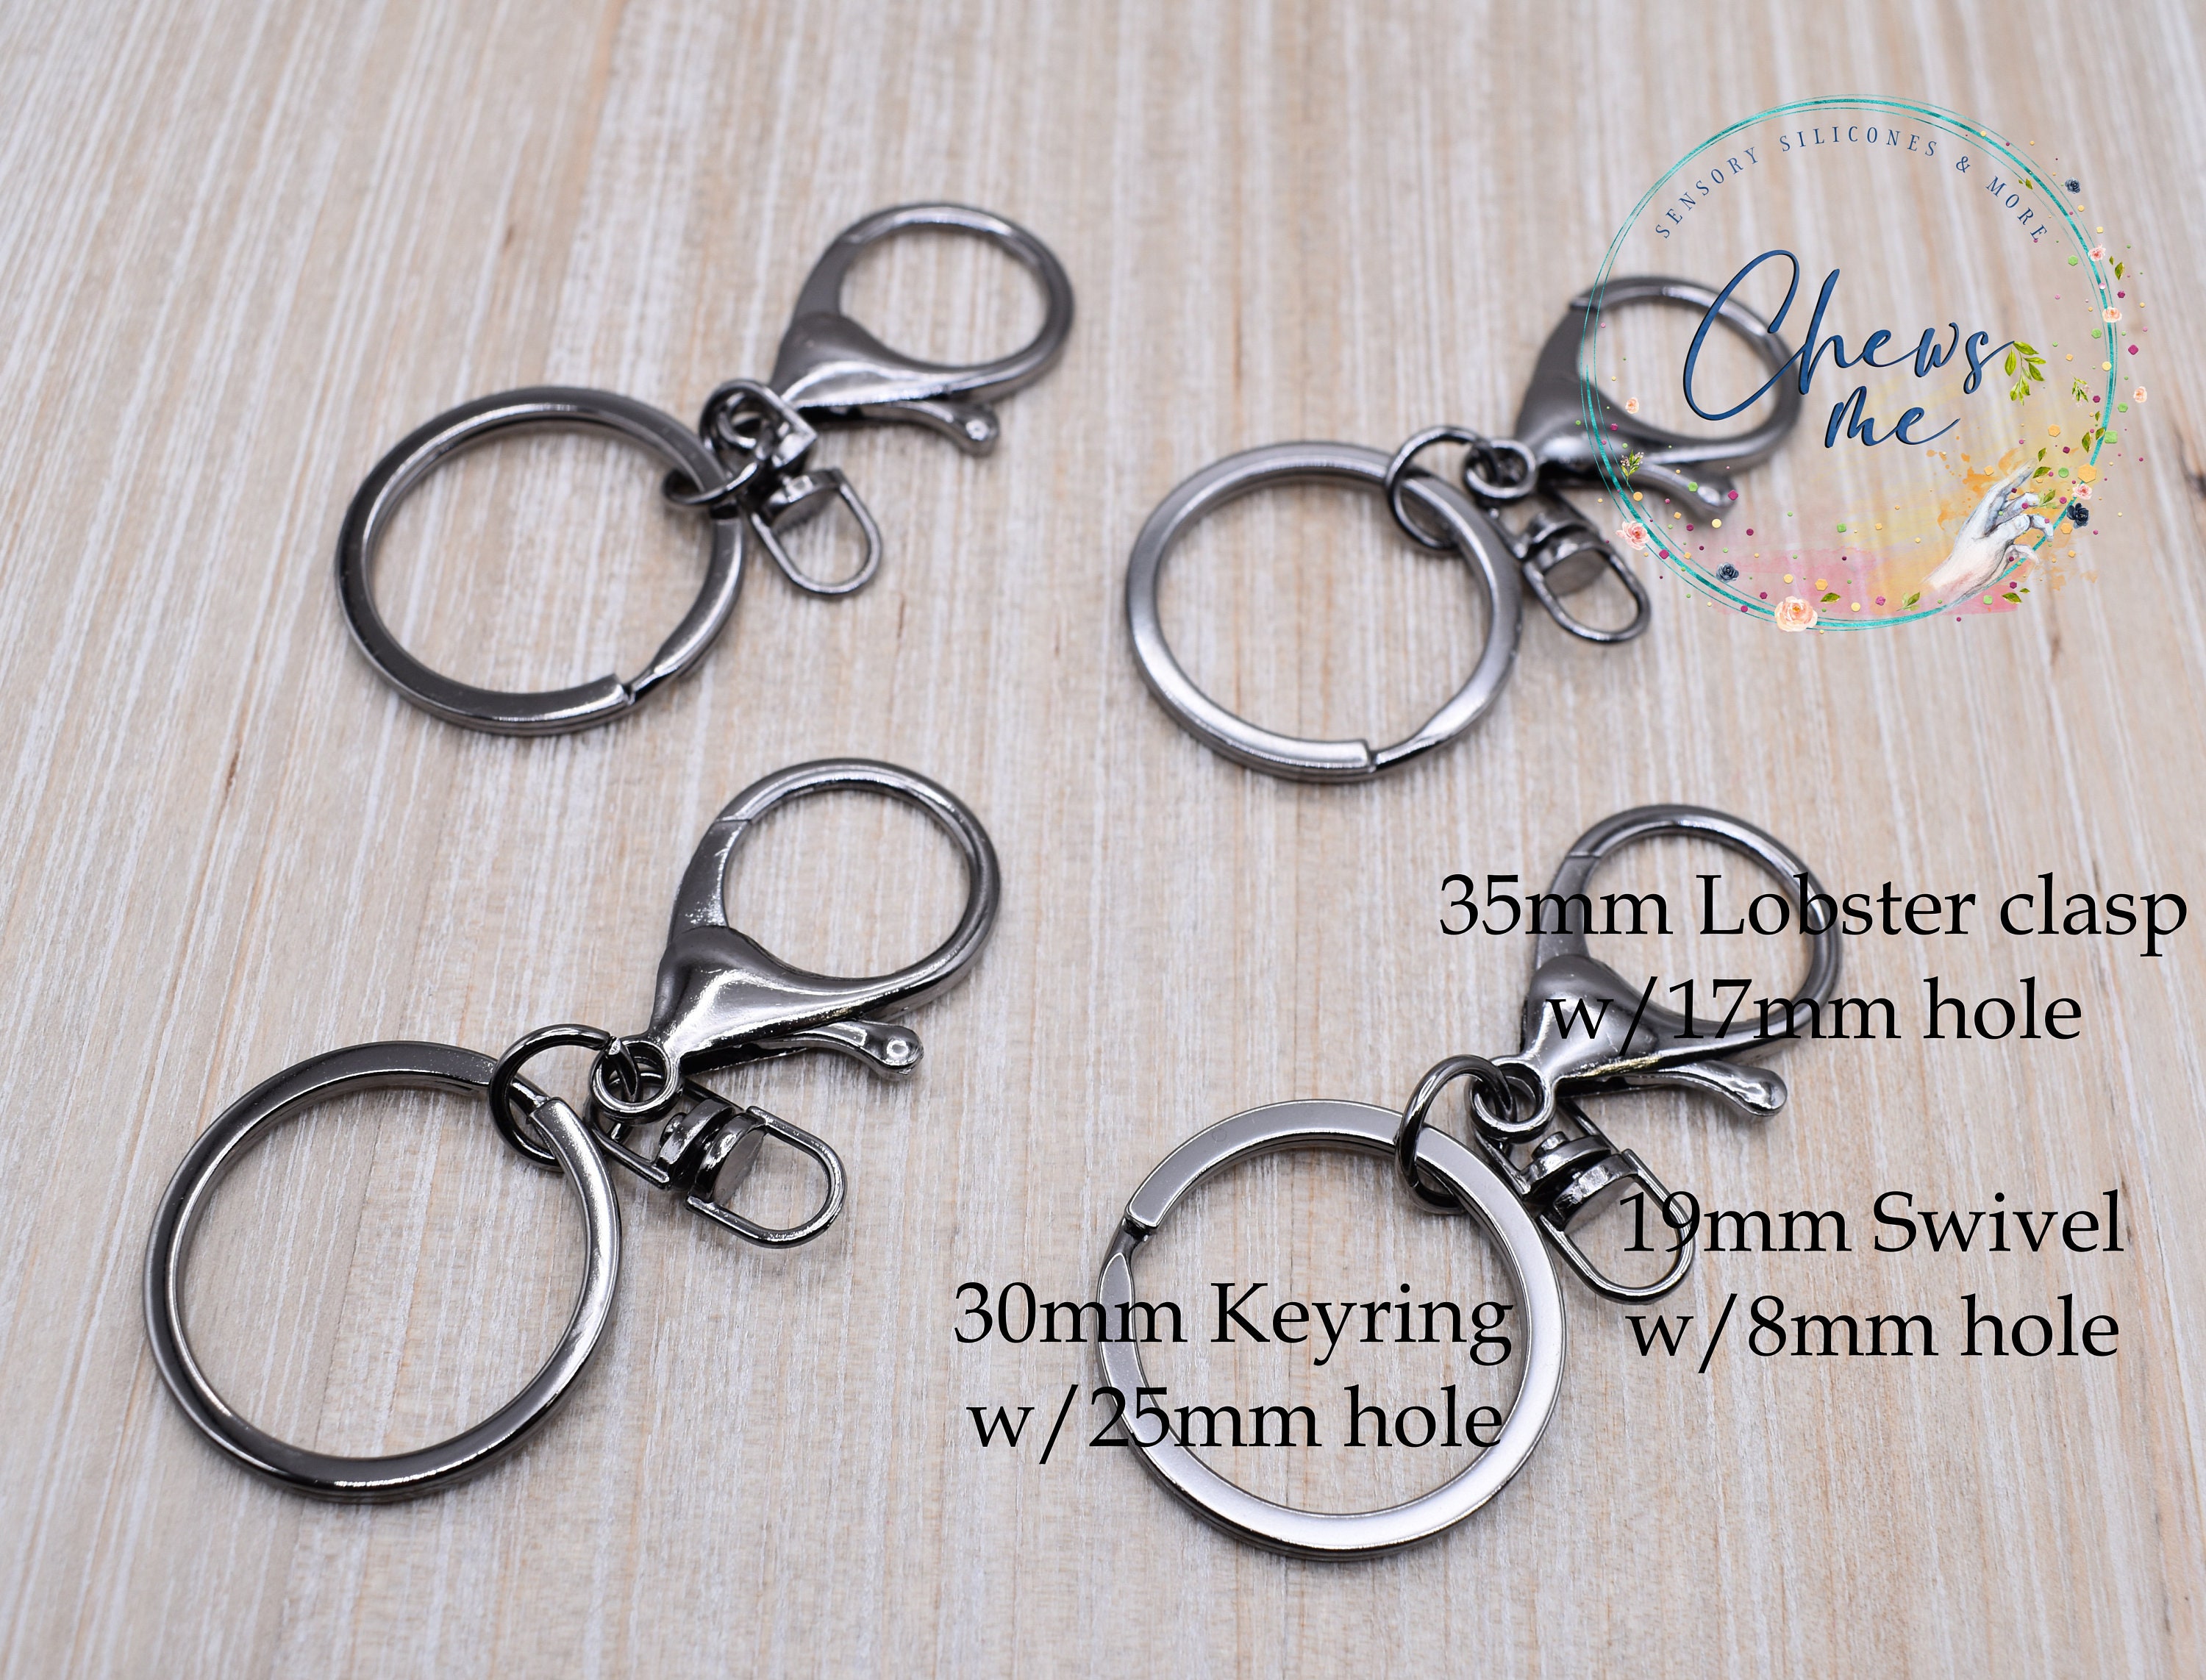 10 Swivel Clips 1.5 Inch With 25mm Key Ring in Antique Bronze